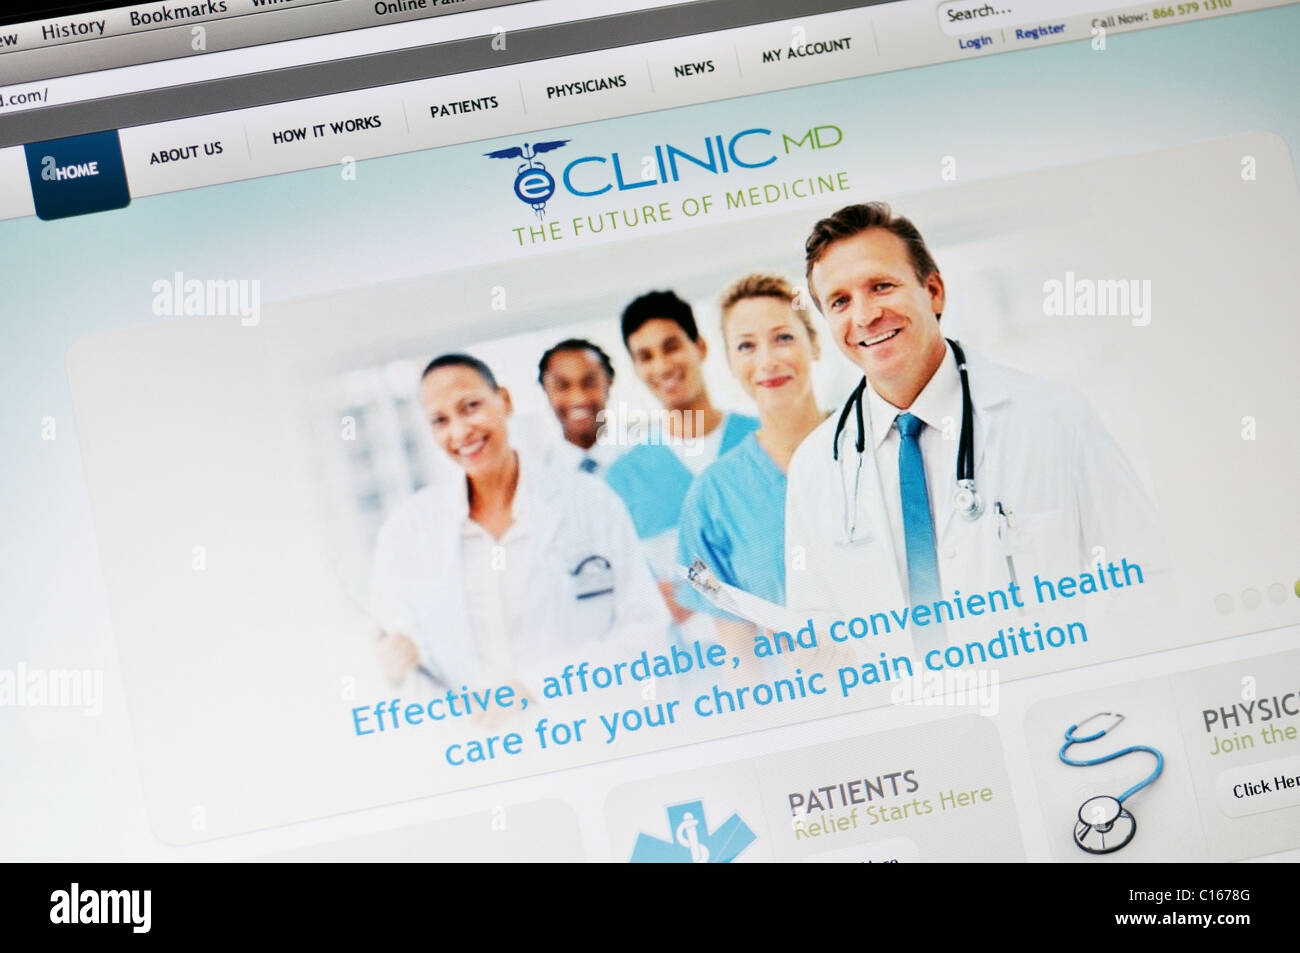 eClinicMD.com website - Online Pain Management and Chronic Pain Treatment Stock Photo